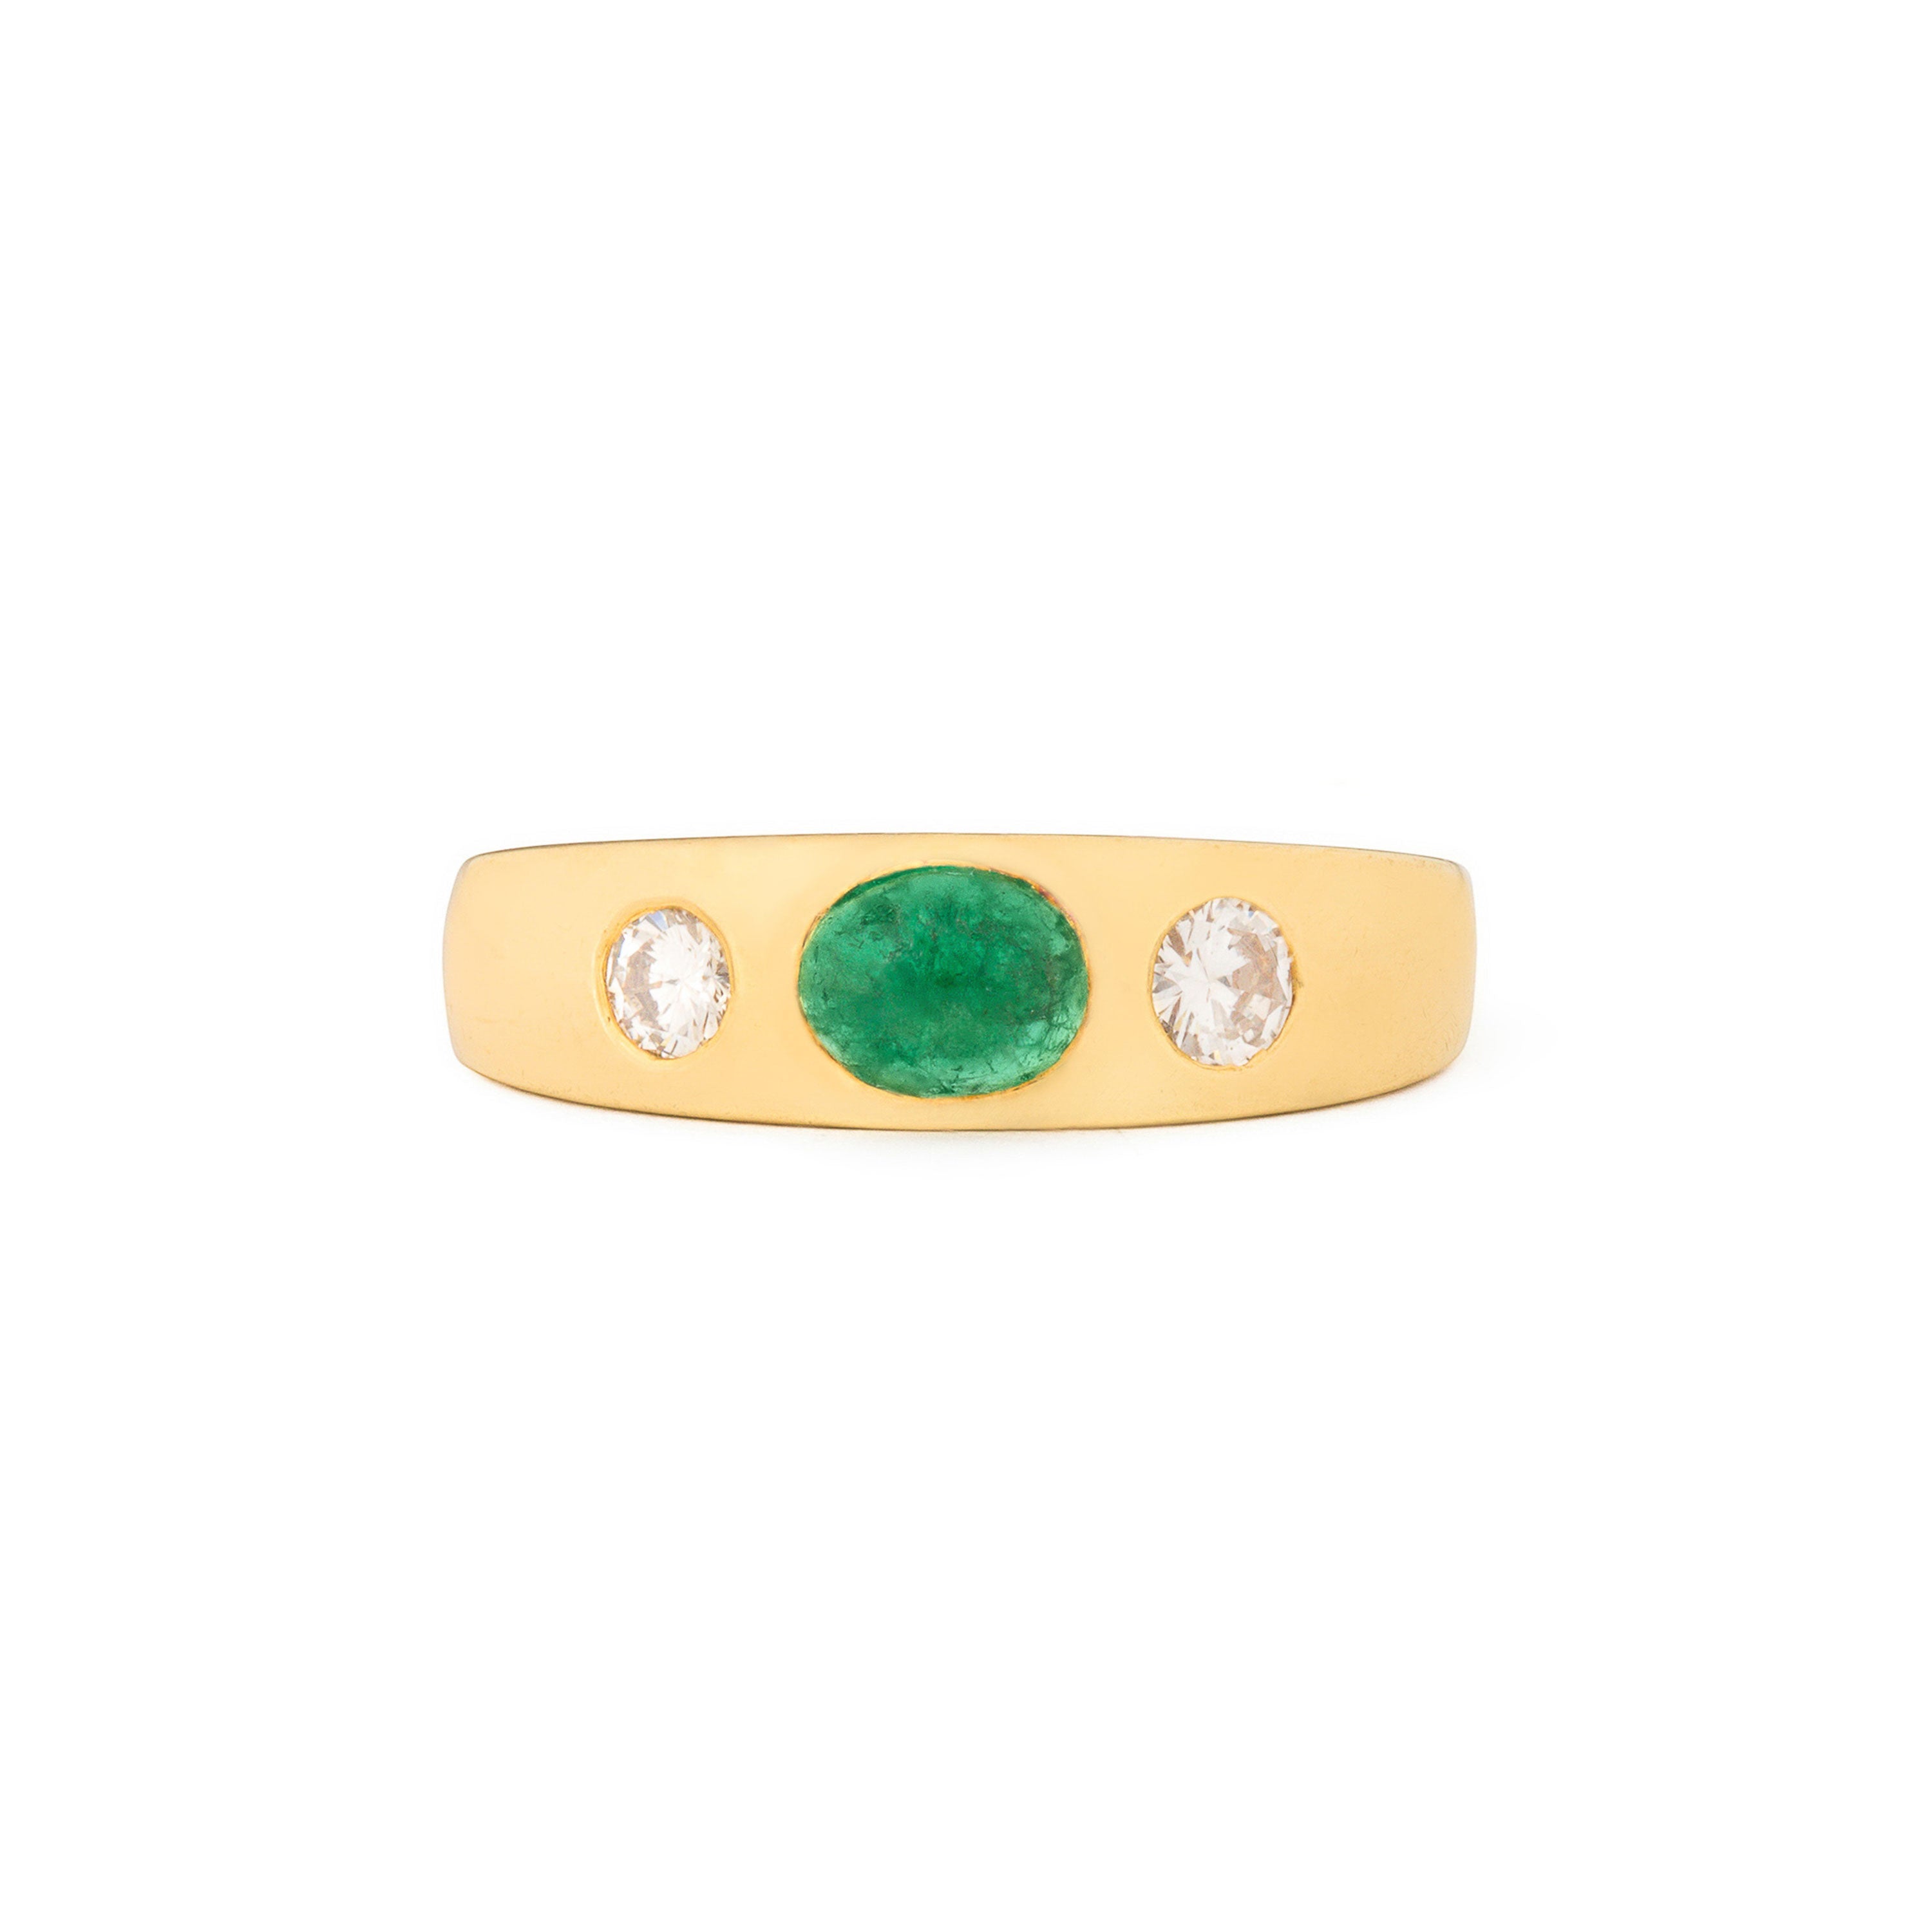 Emerald Cabochon, Diamond, and 18k Gold Ring